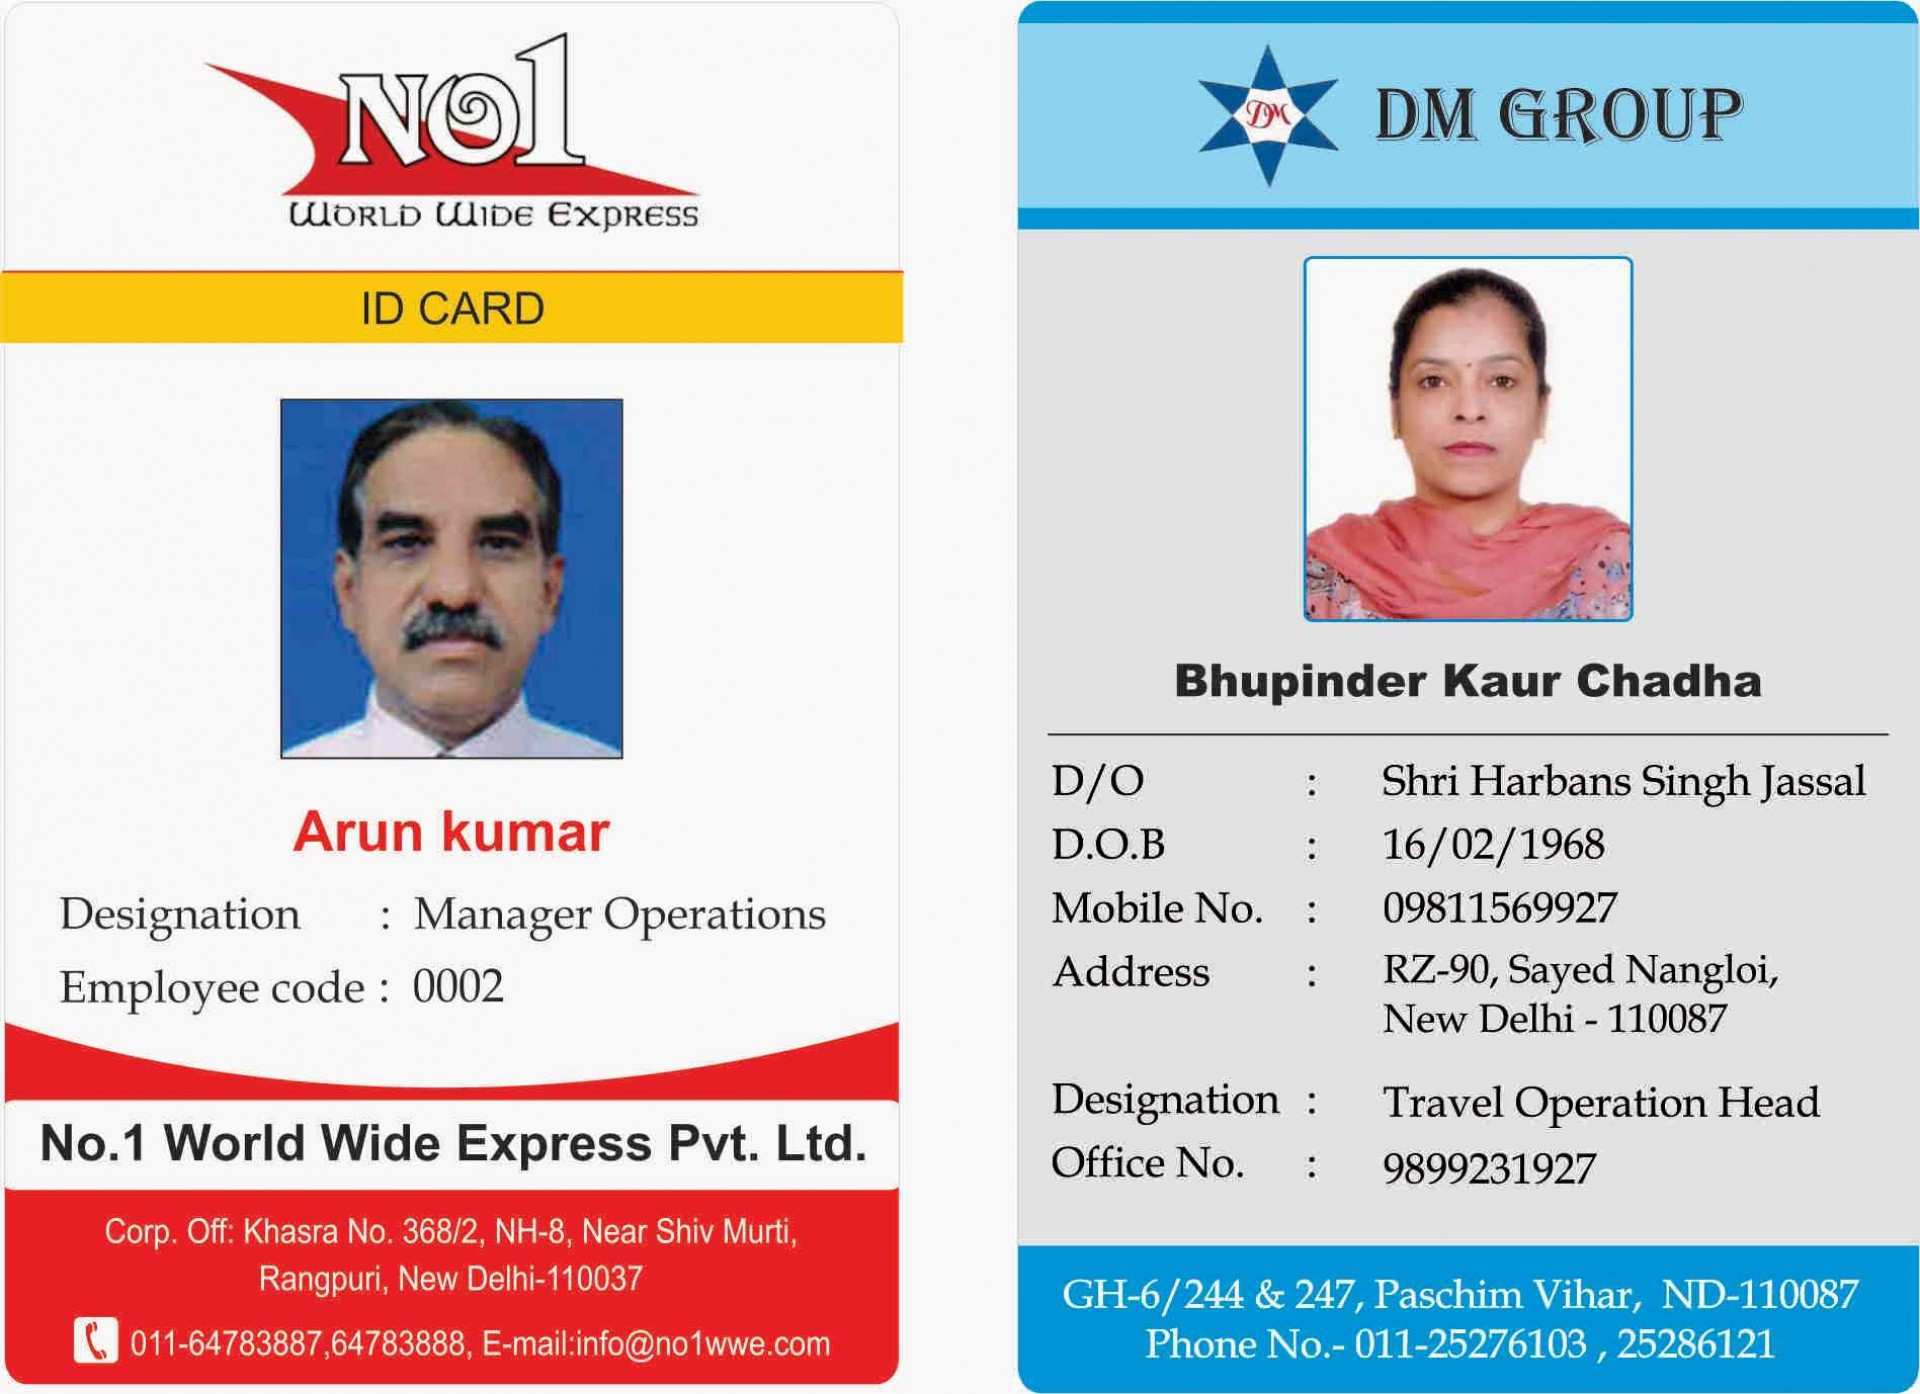 73-free-printable-employee-id-card-template-india-in-photoshop-with